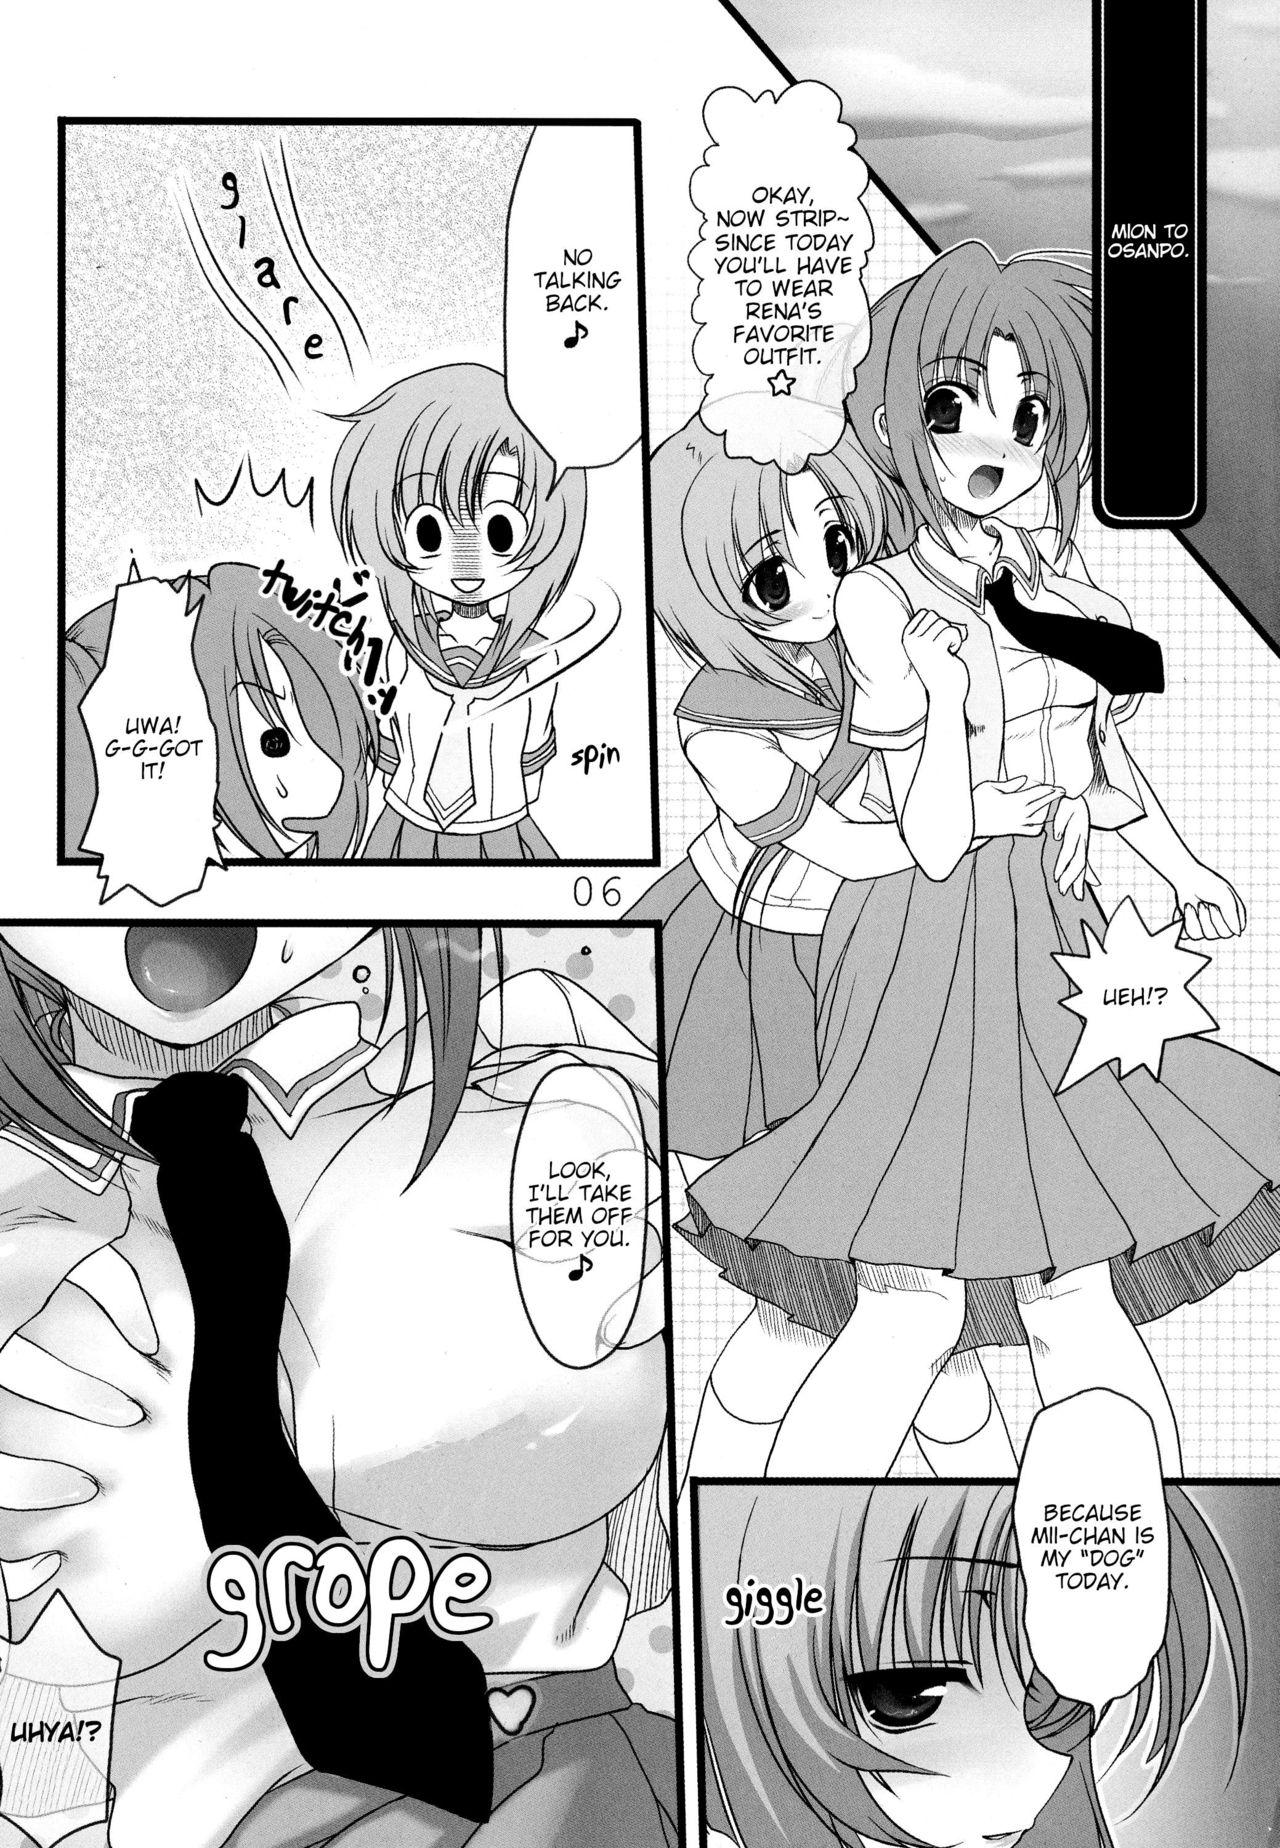 Best Blowjobs Ever Mion to Osanpo. - Higurashi no naku koro ni | when they cry Amature Sex - Page 6